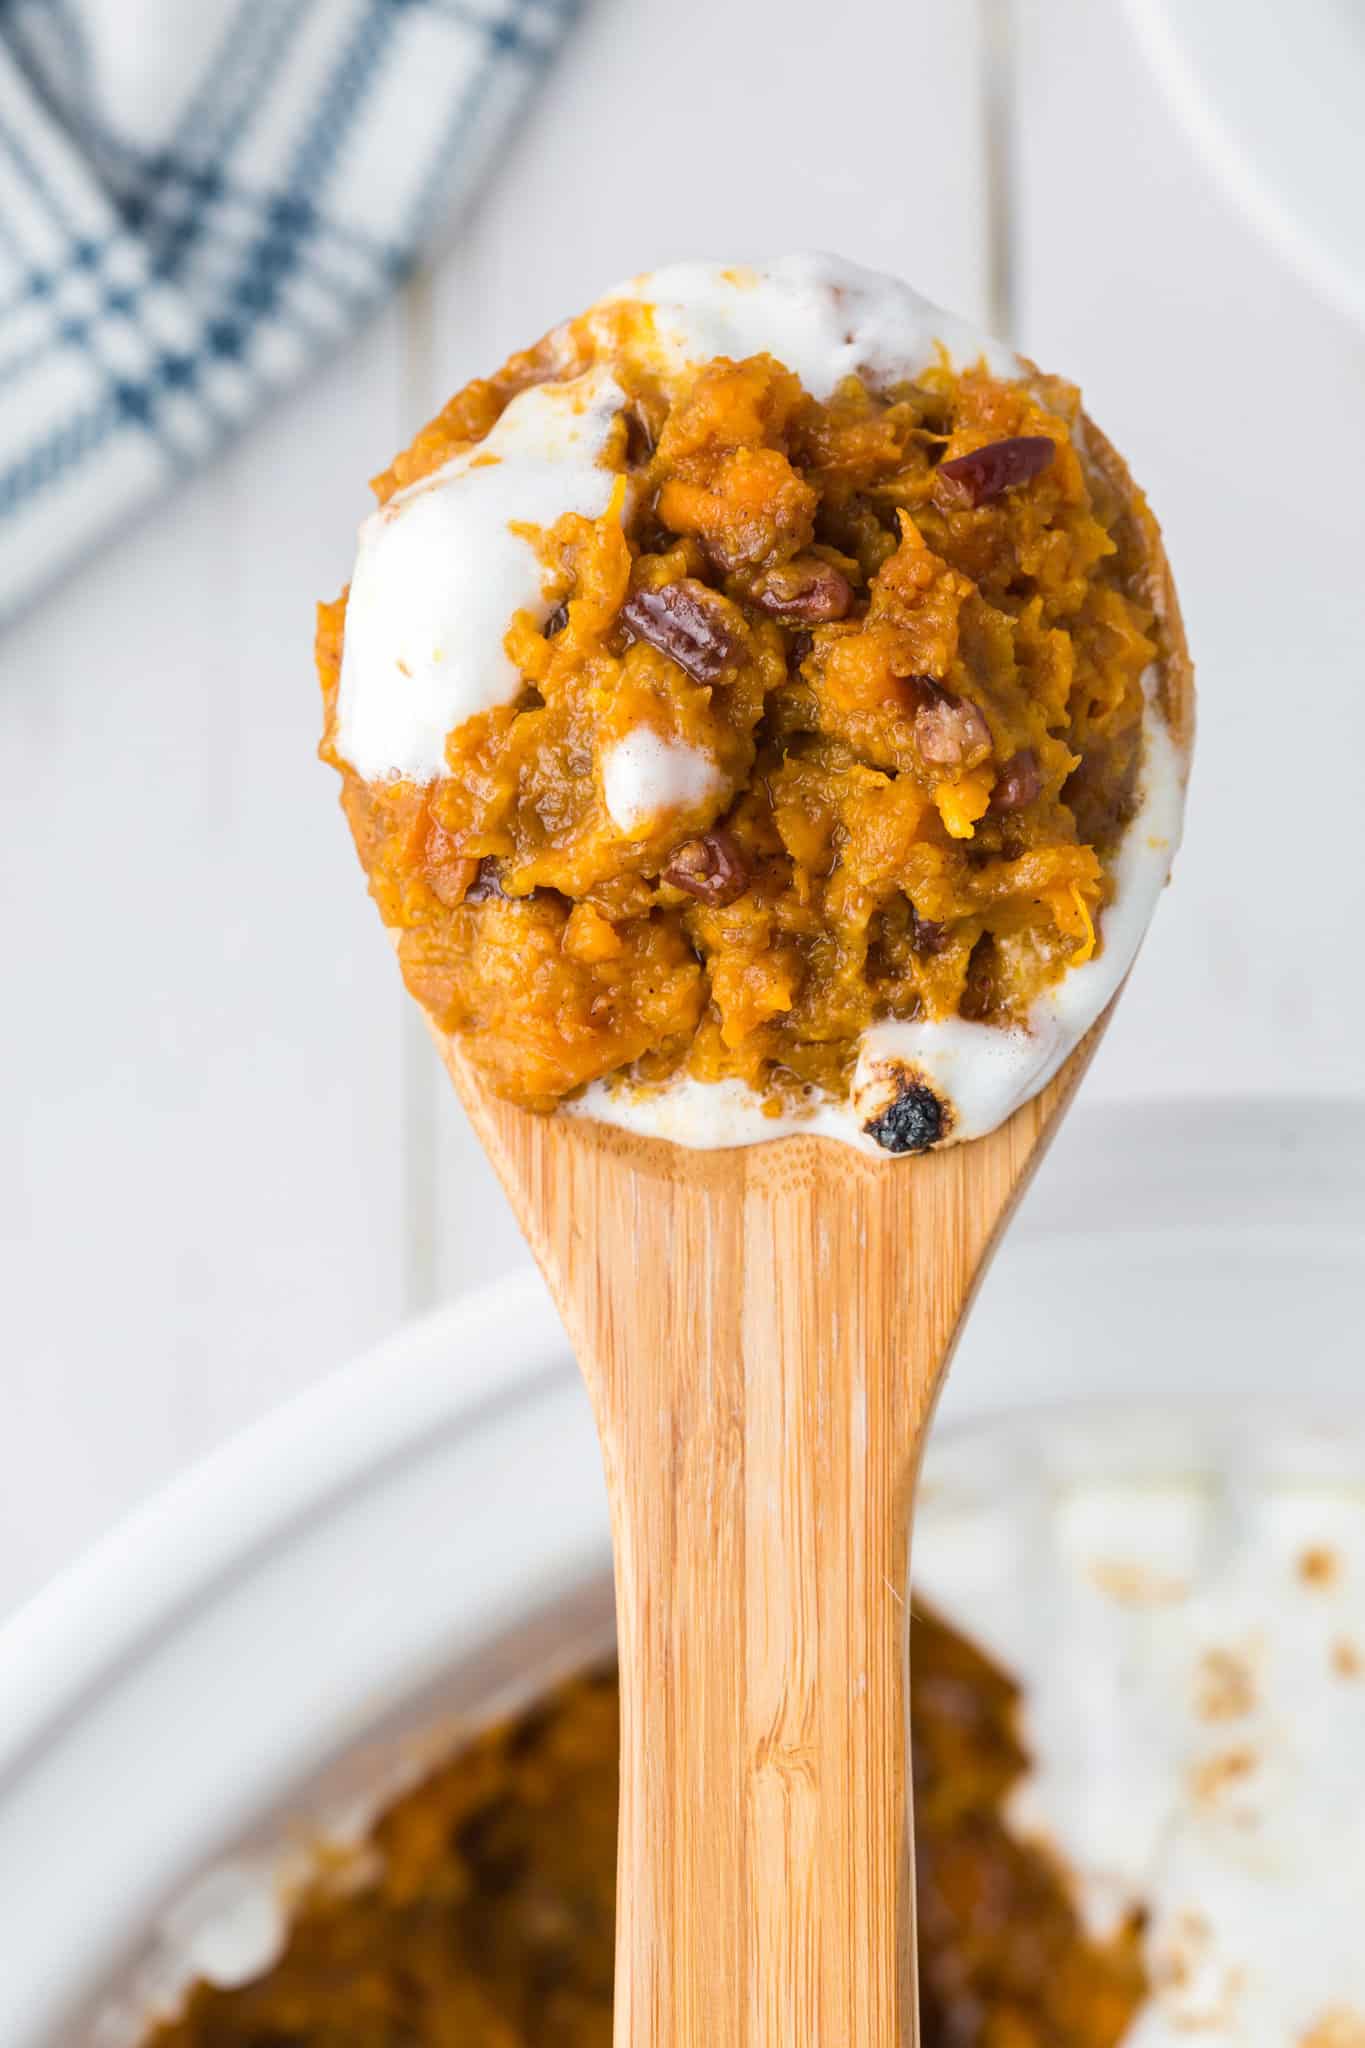 Crock Pot Sweet Potato Casserole is a delicious slow cooker holiday side dish recipe loaded brown sugar, chopped pecans and mini marshmallows.